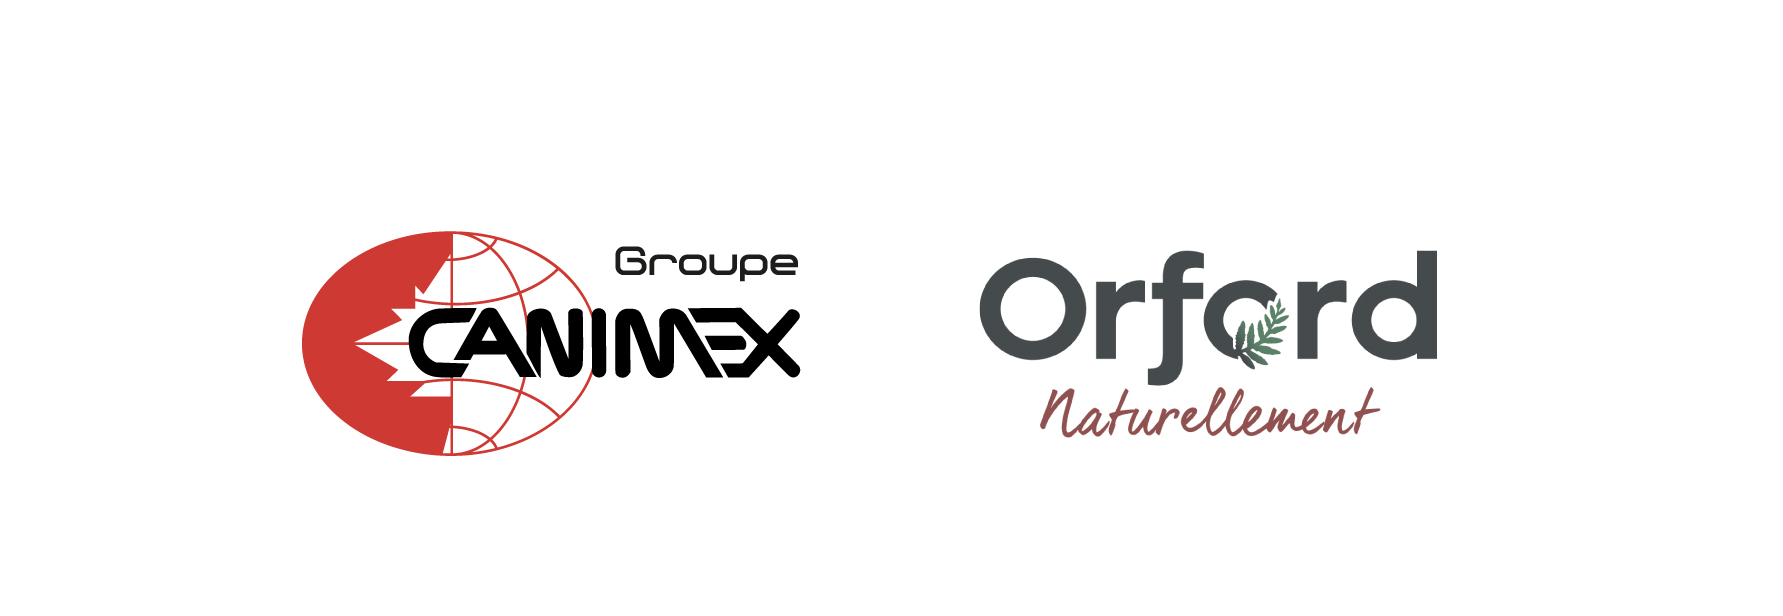 Groupe Canimex et Orford